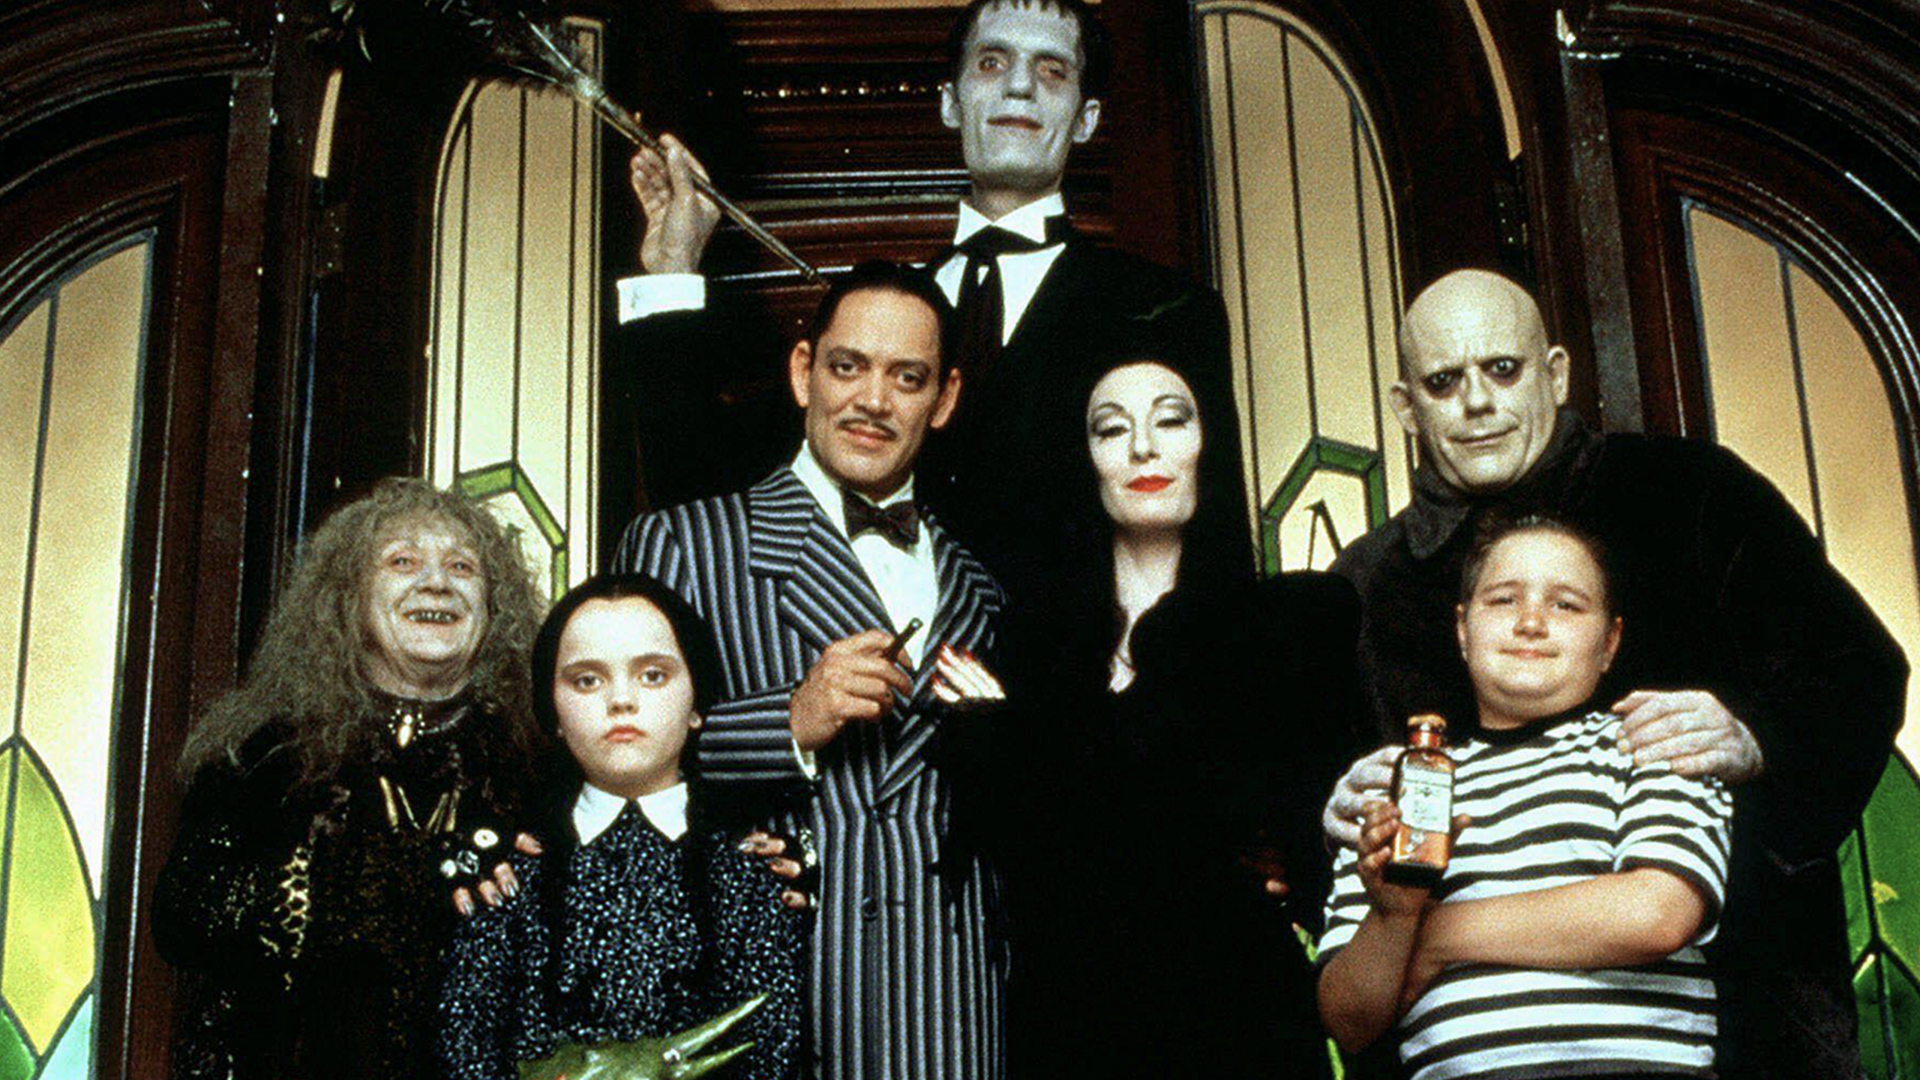 Addams Family film from the '90s